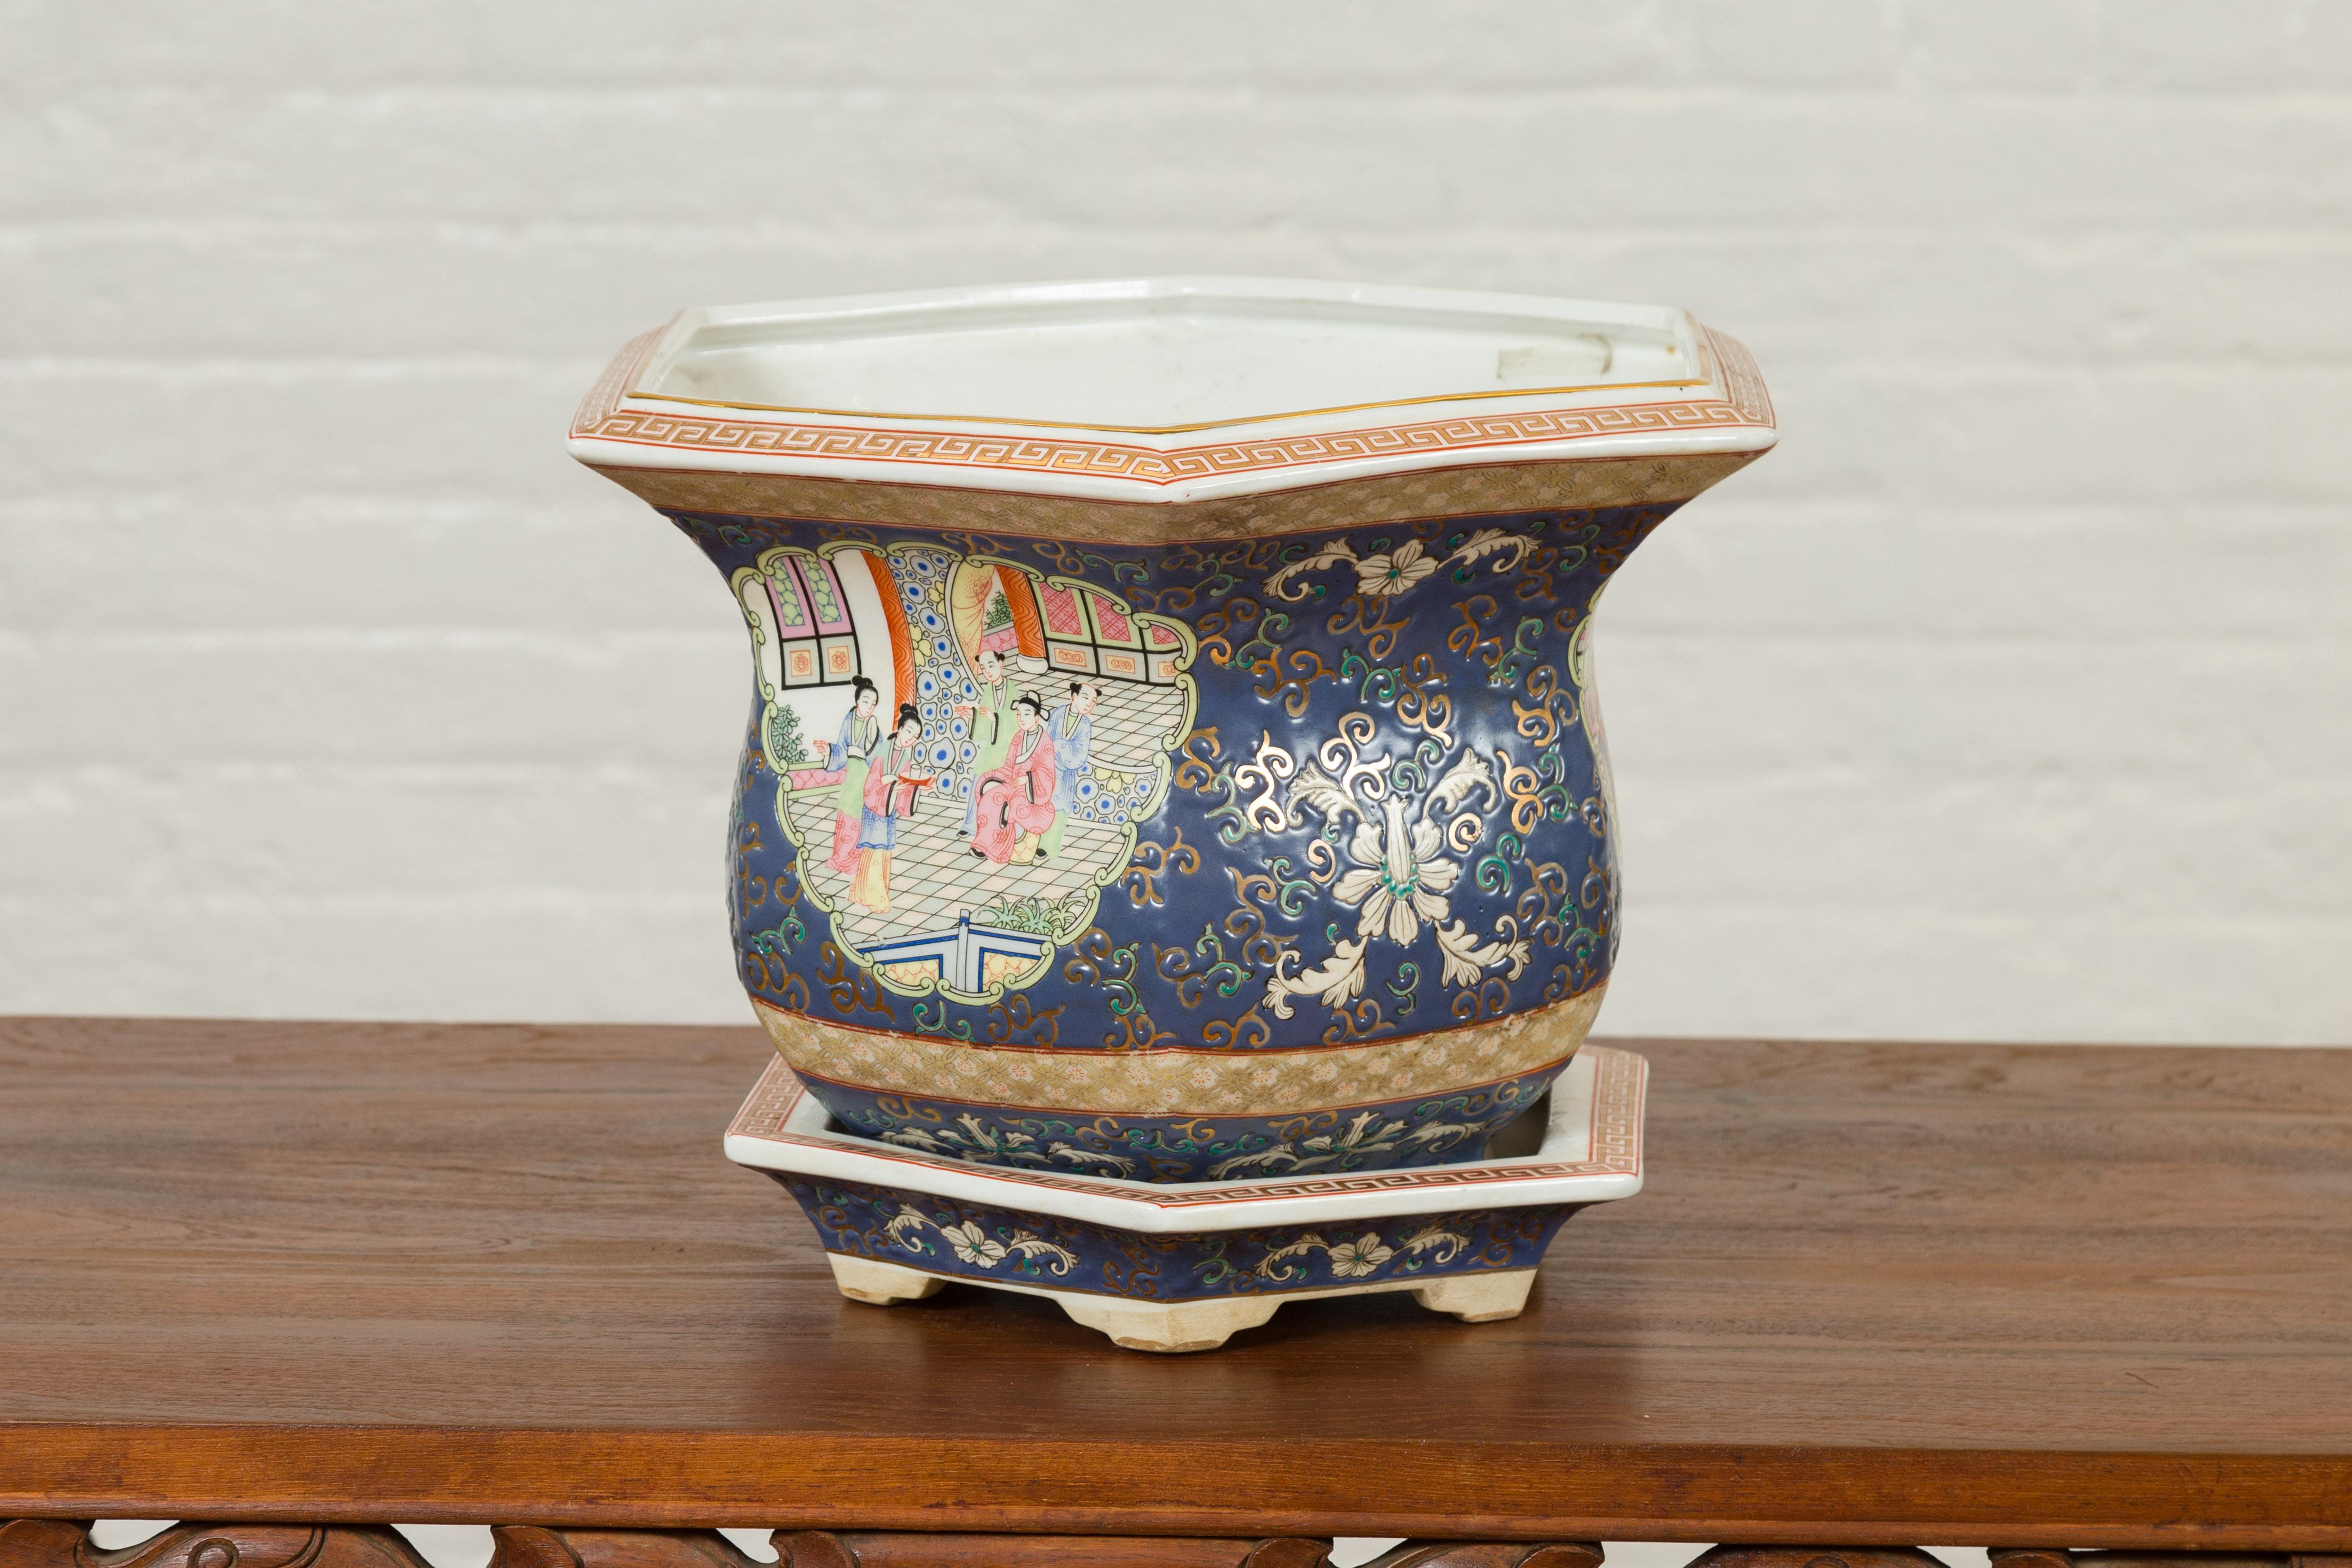 Chinese Hexagonal Planter with Hand Painted Courtyard Scenes Depicting Maidens 4